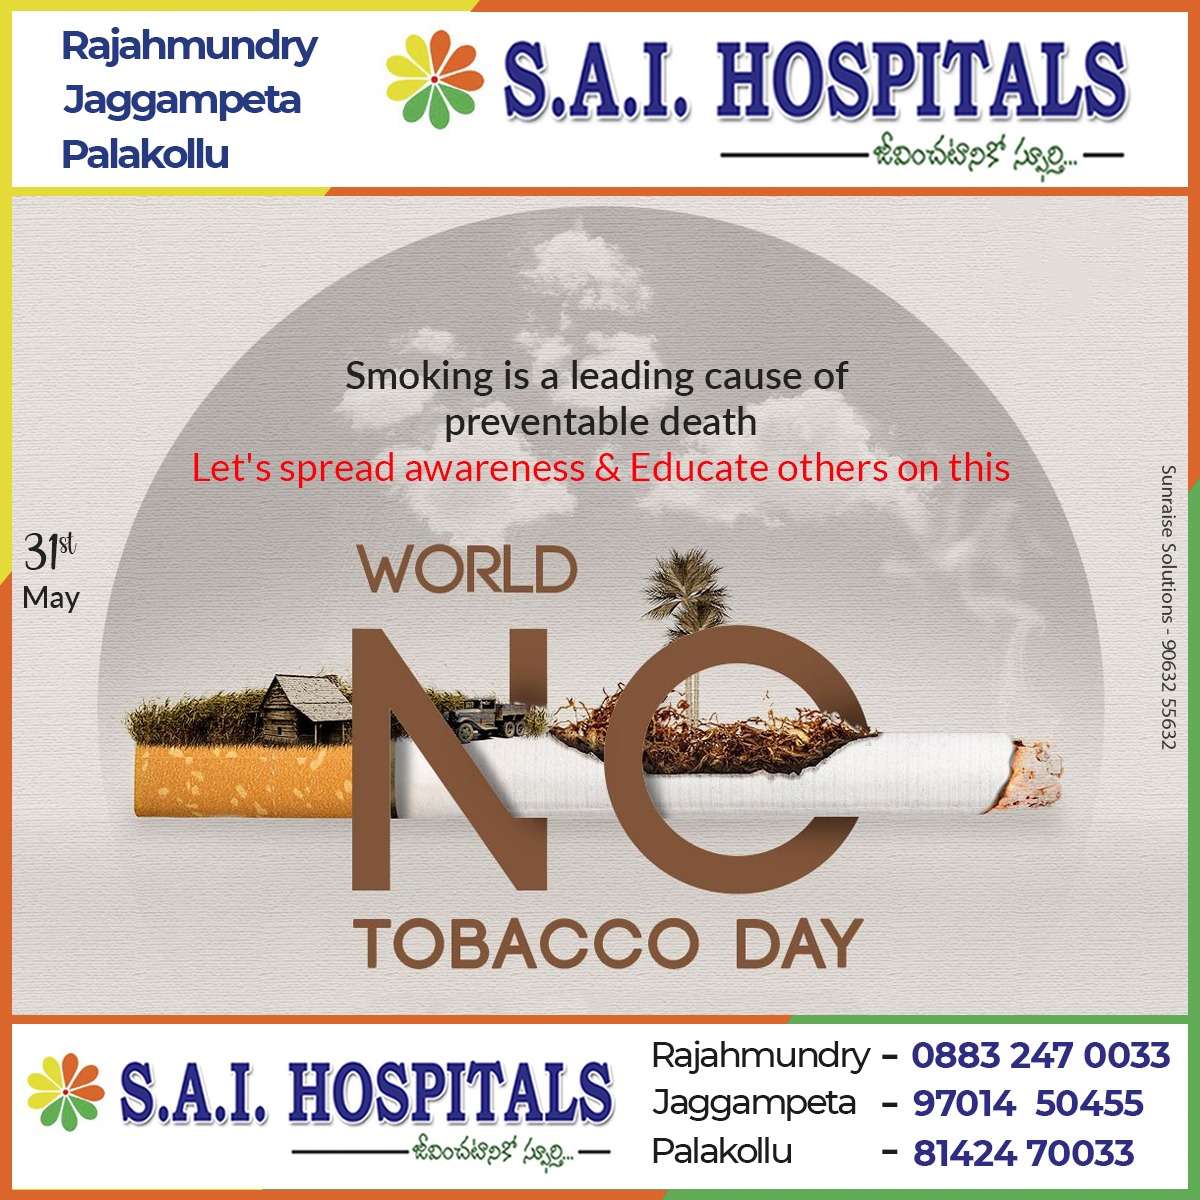 Every year, Tobacco use kills millions of people.
On INTERNATIONAL ANTI-TOBACCO DAY,
let's join the fight to reduce the devastating impact of tobacco.
#saihospitals #nosmoking #besafe #AntiTobaccoDay #behealthy